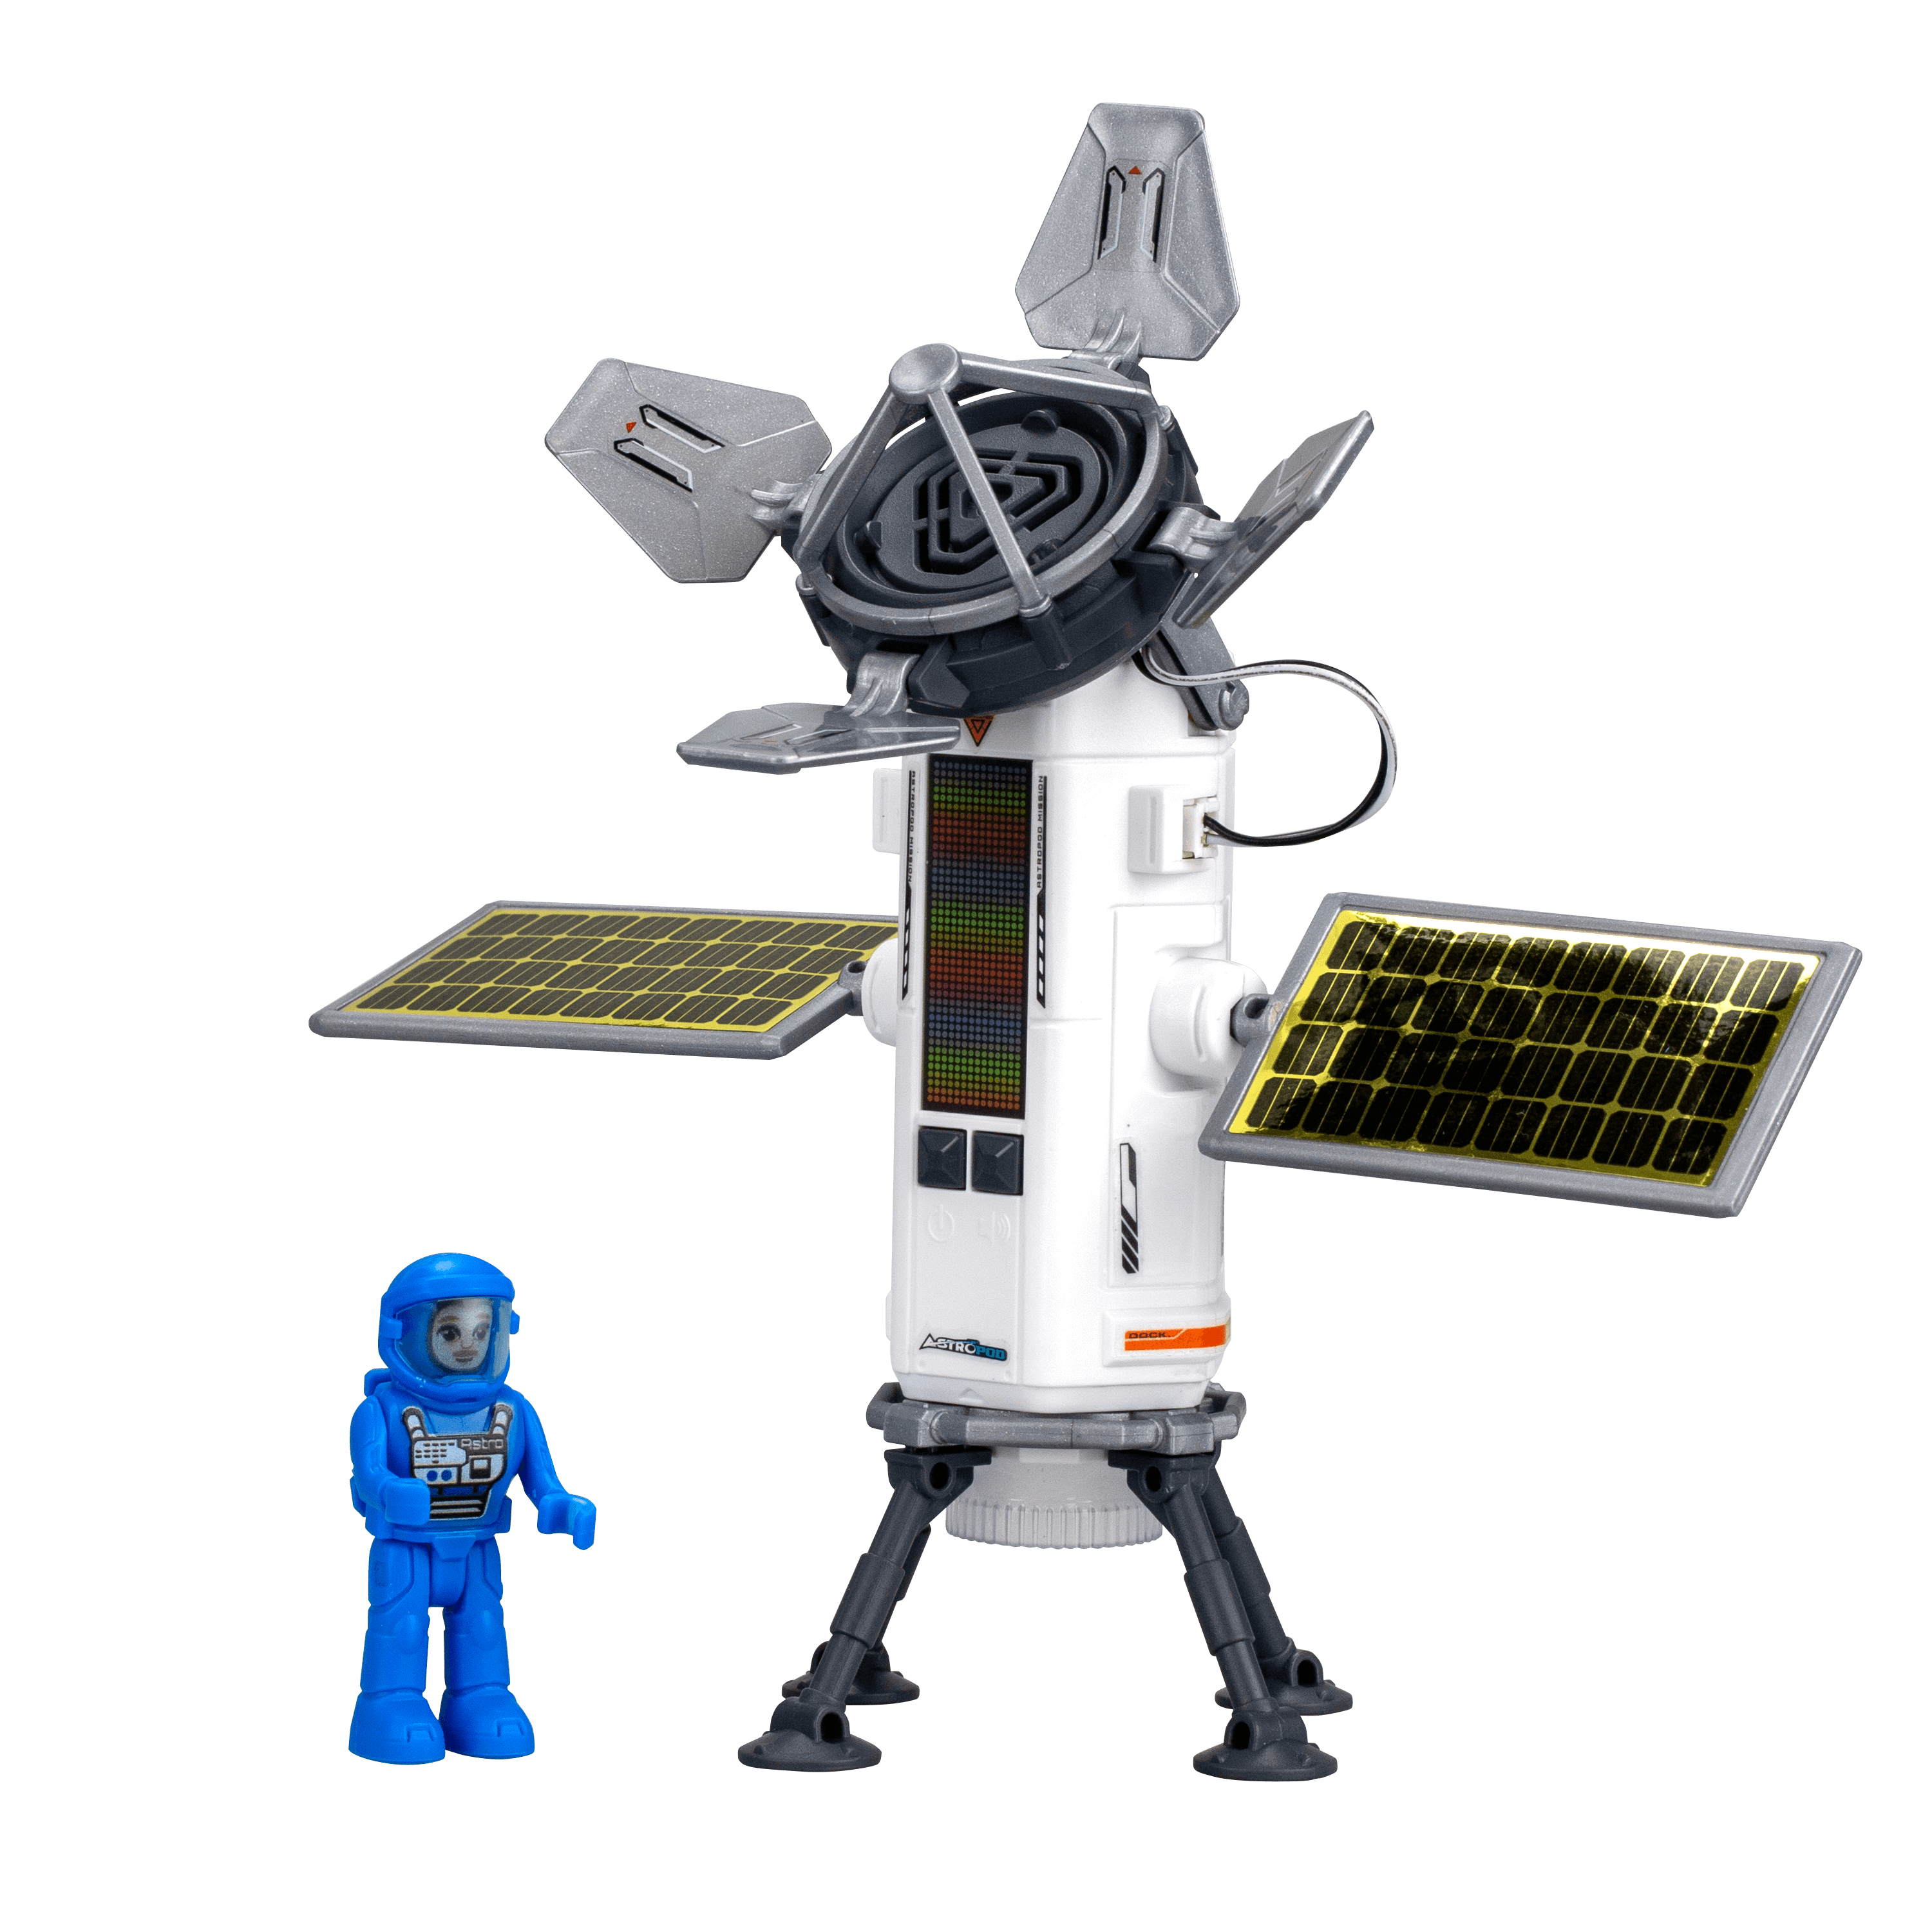 Playmobil sends ESA astronauts on 'Mars Expedition' with new toy set